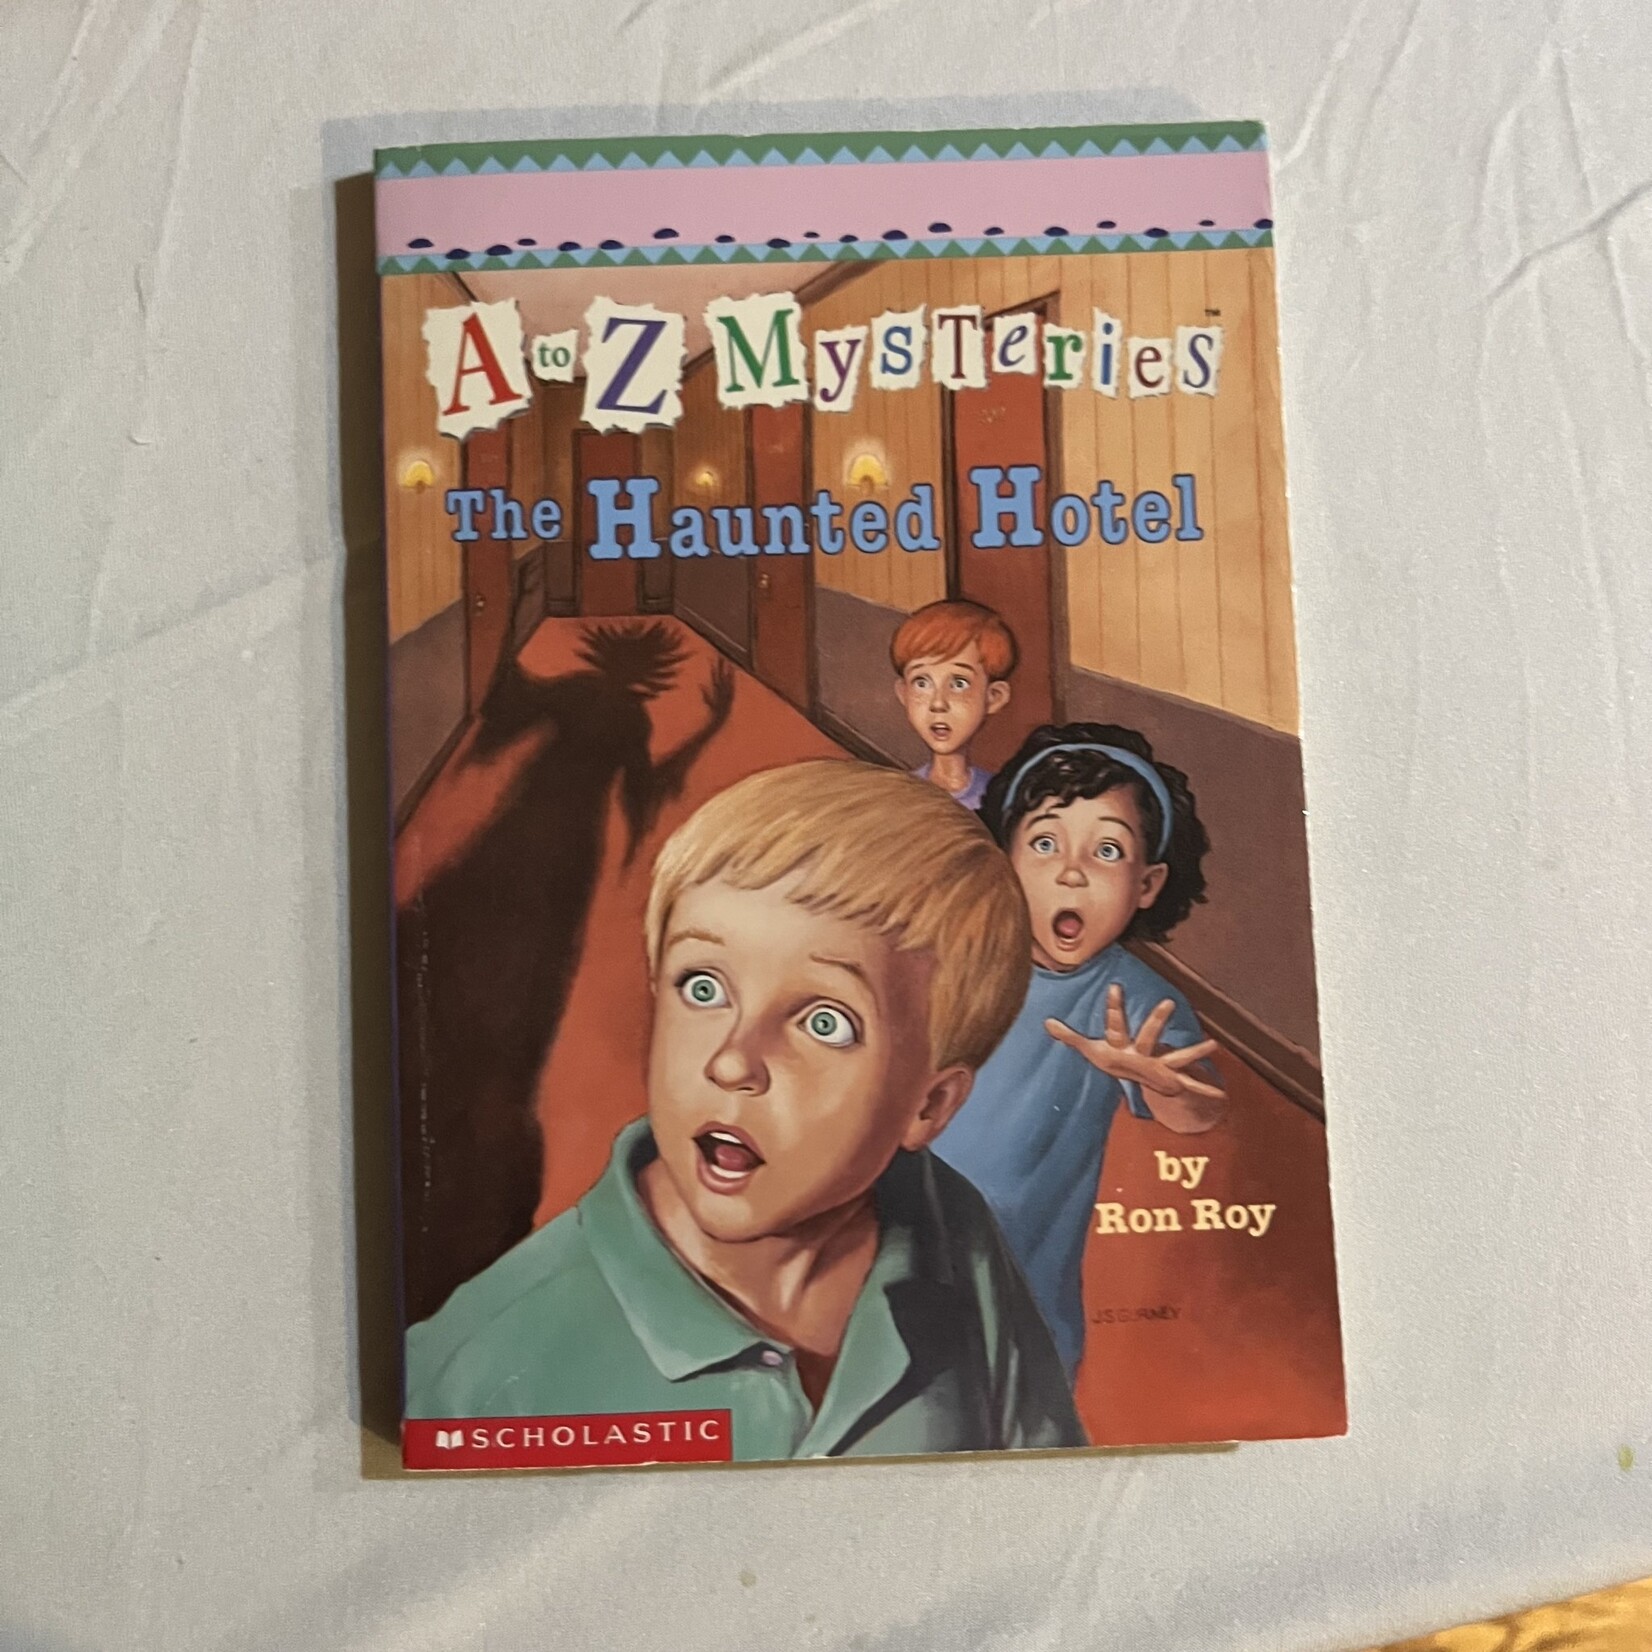 A to Z Mysteries - The Haunted Hotel